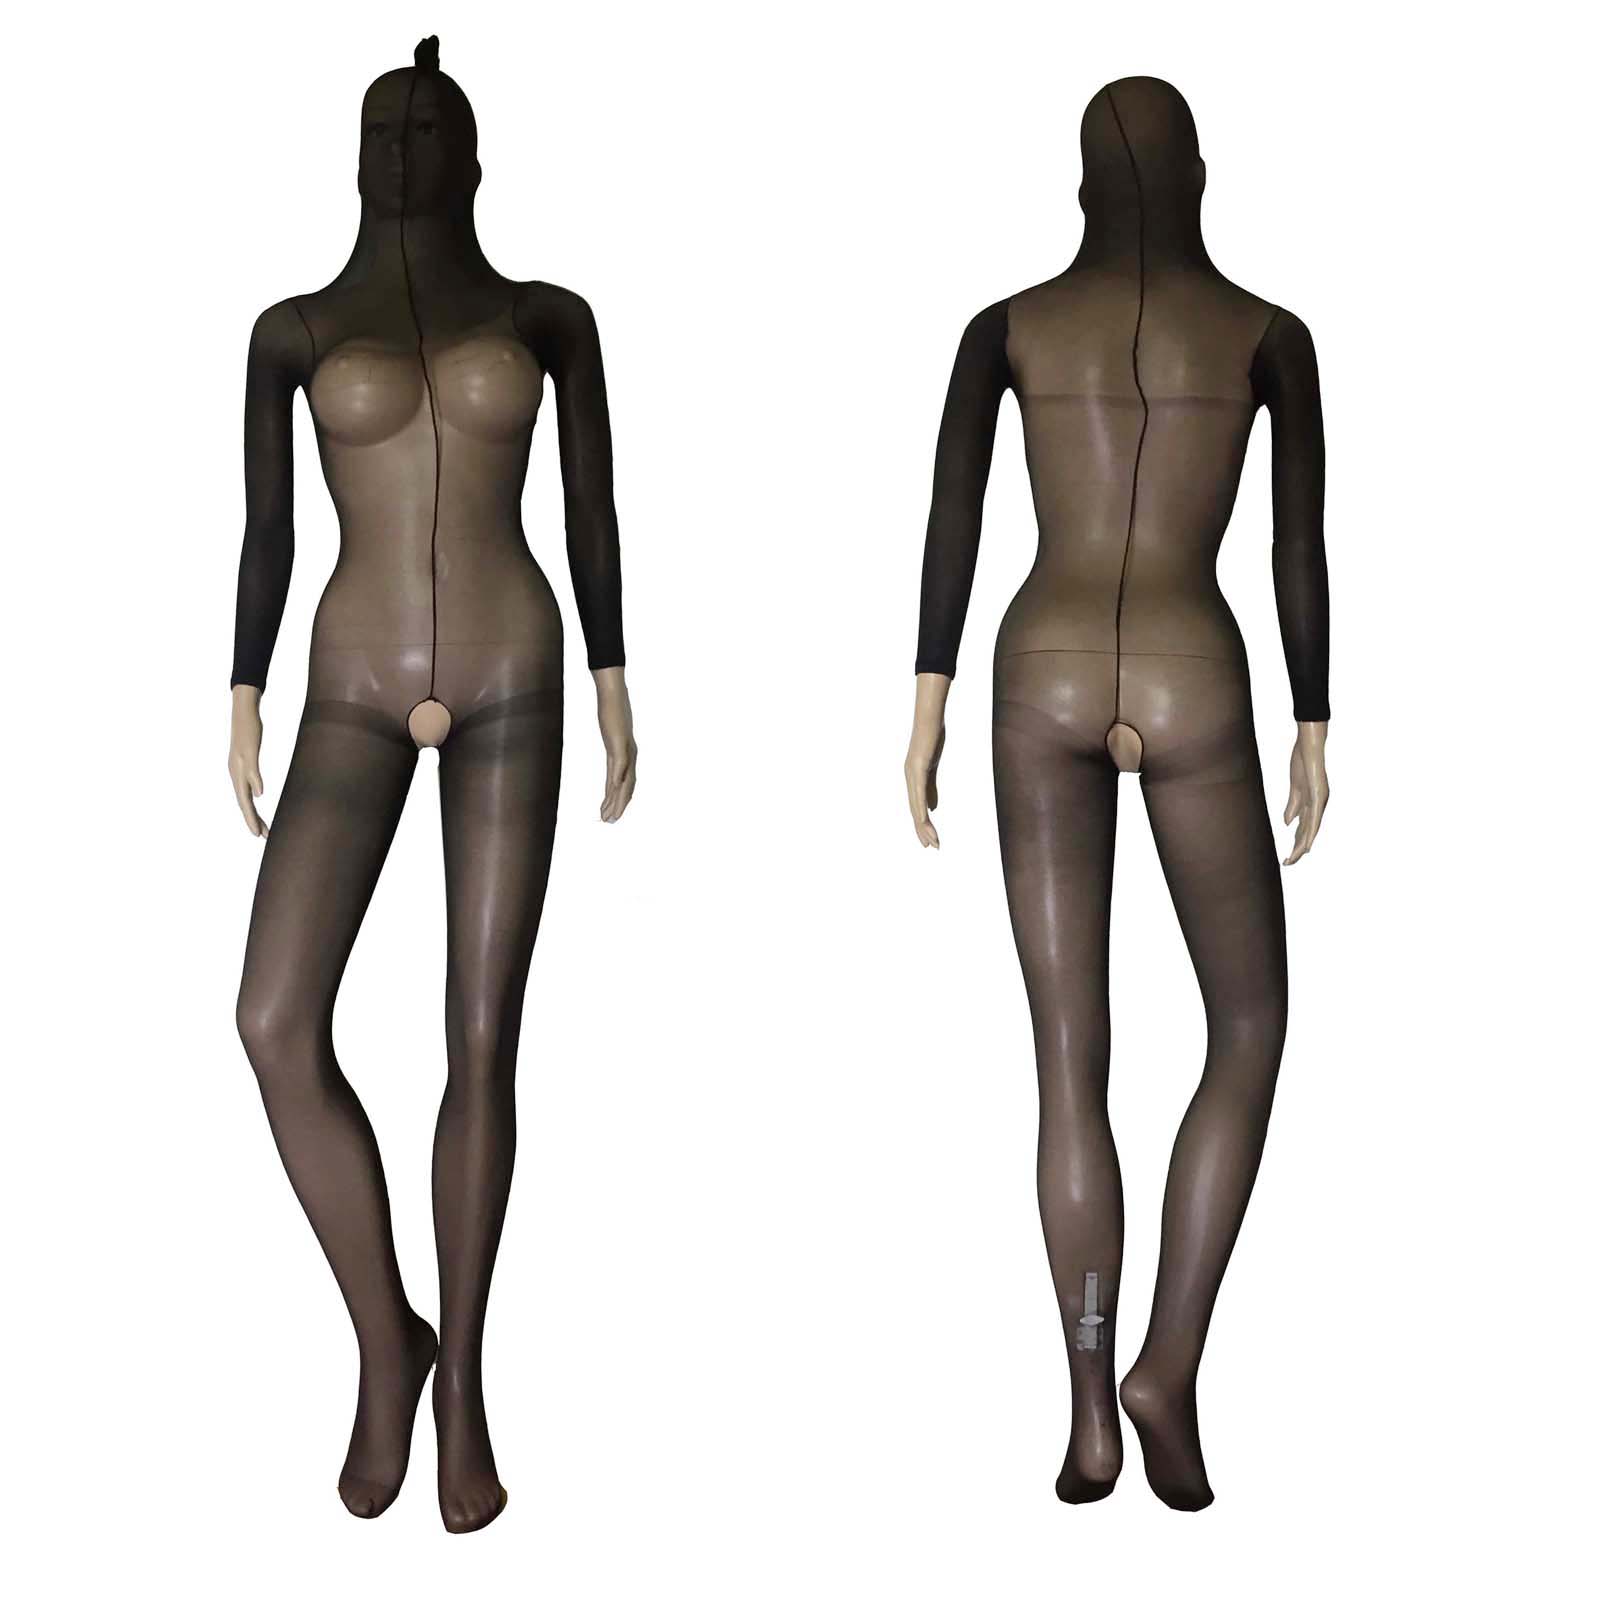 Unisex Sexy Sheer Open Crotch Body Encasement Up to Head Bodyhose BodyStocking Pantyhose Fetish Playsuit Lingerie